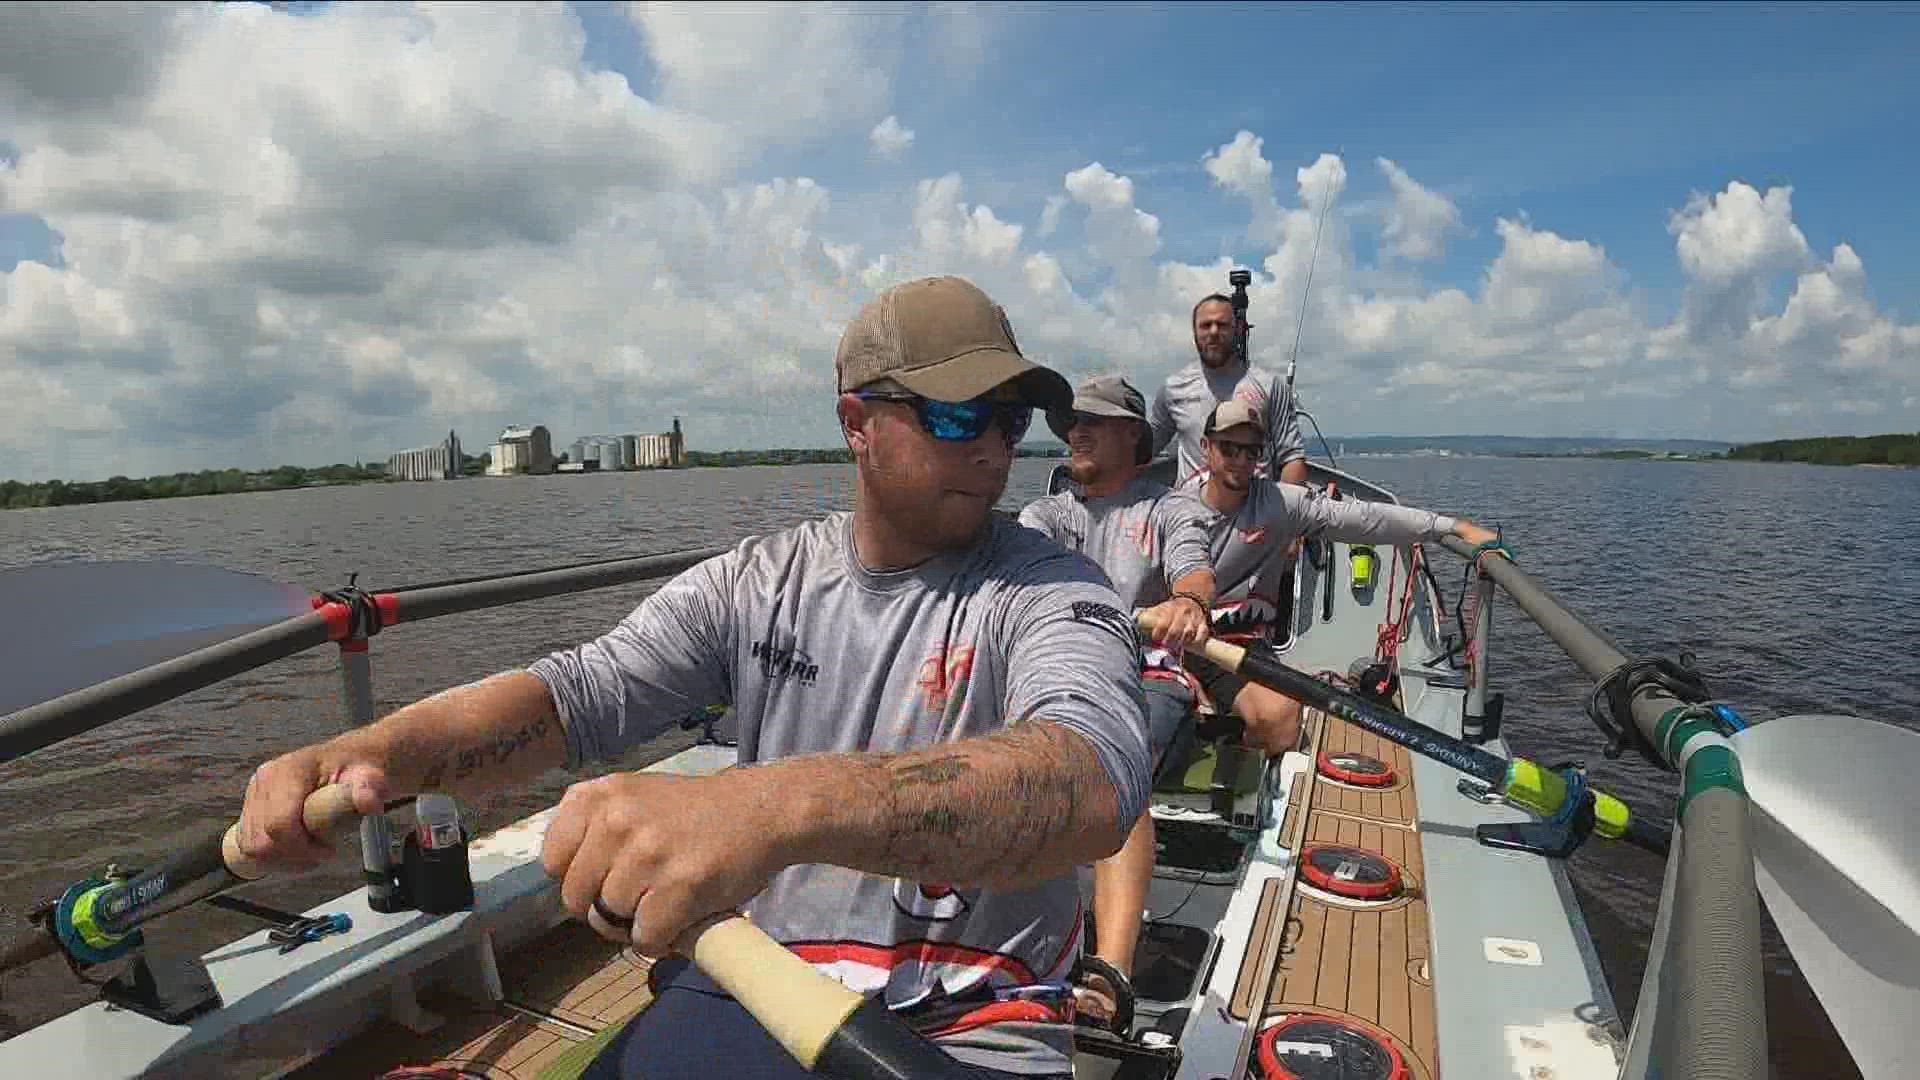 Miller and his team are preparing to row across the Atlantic Ocean. It's a 3,000-mile journey where he'll constantly be moving forward and pushing against his past.